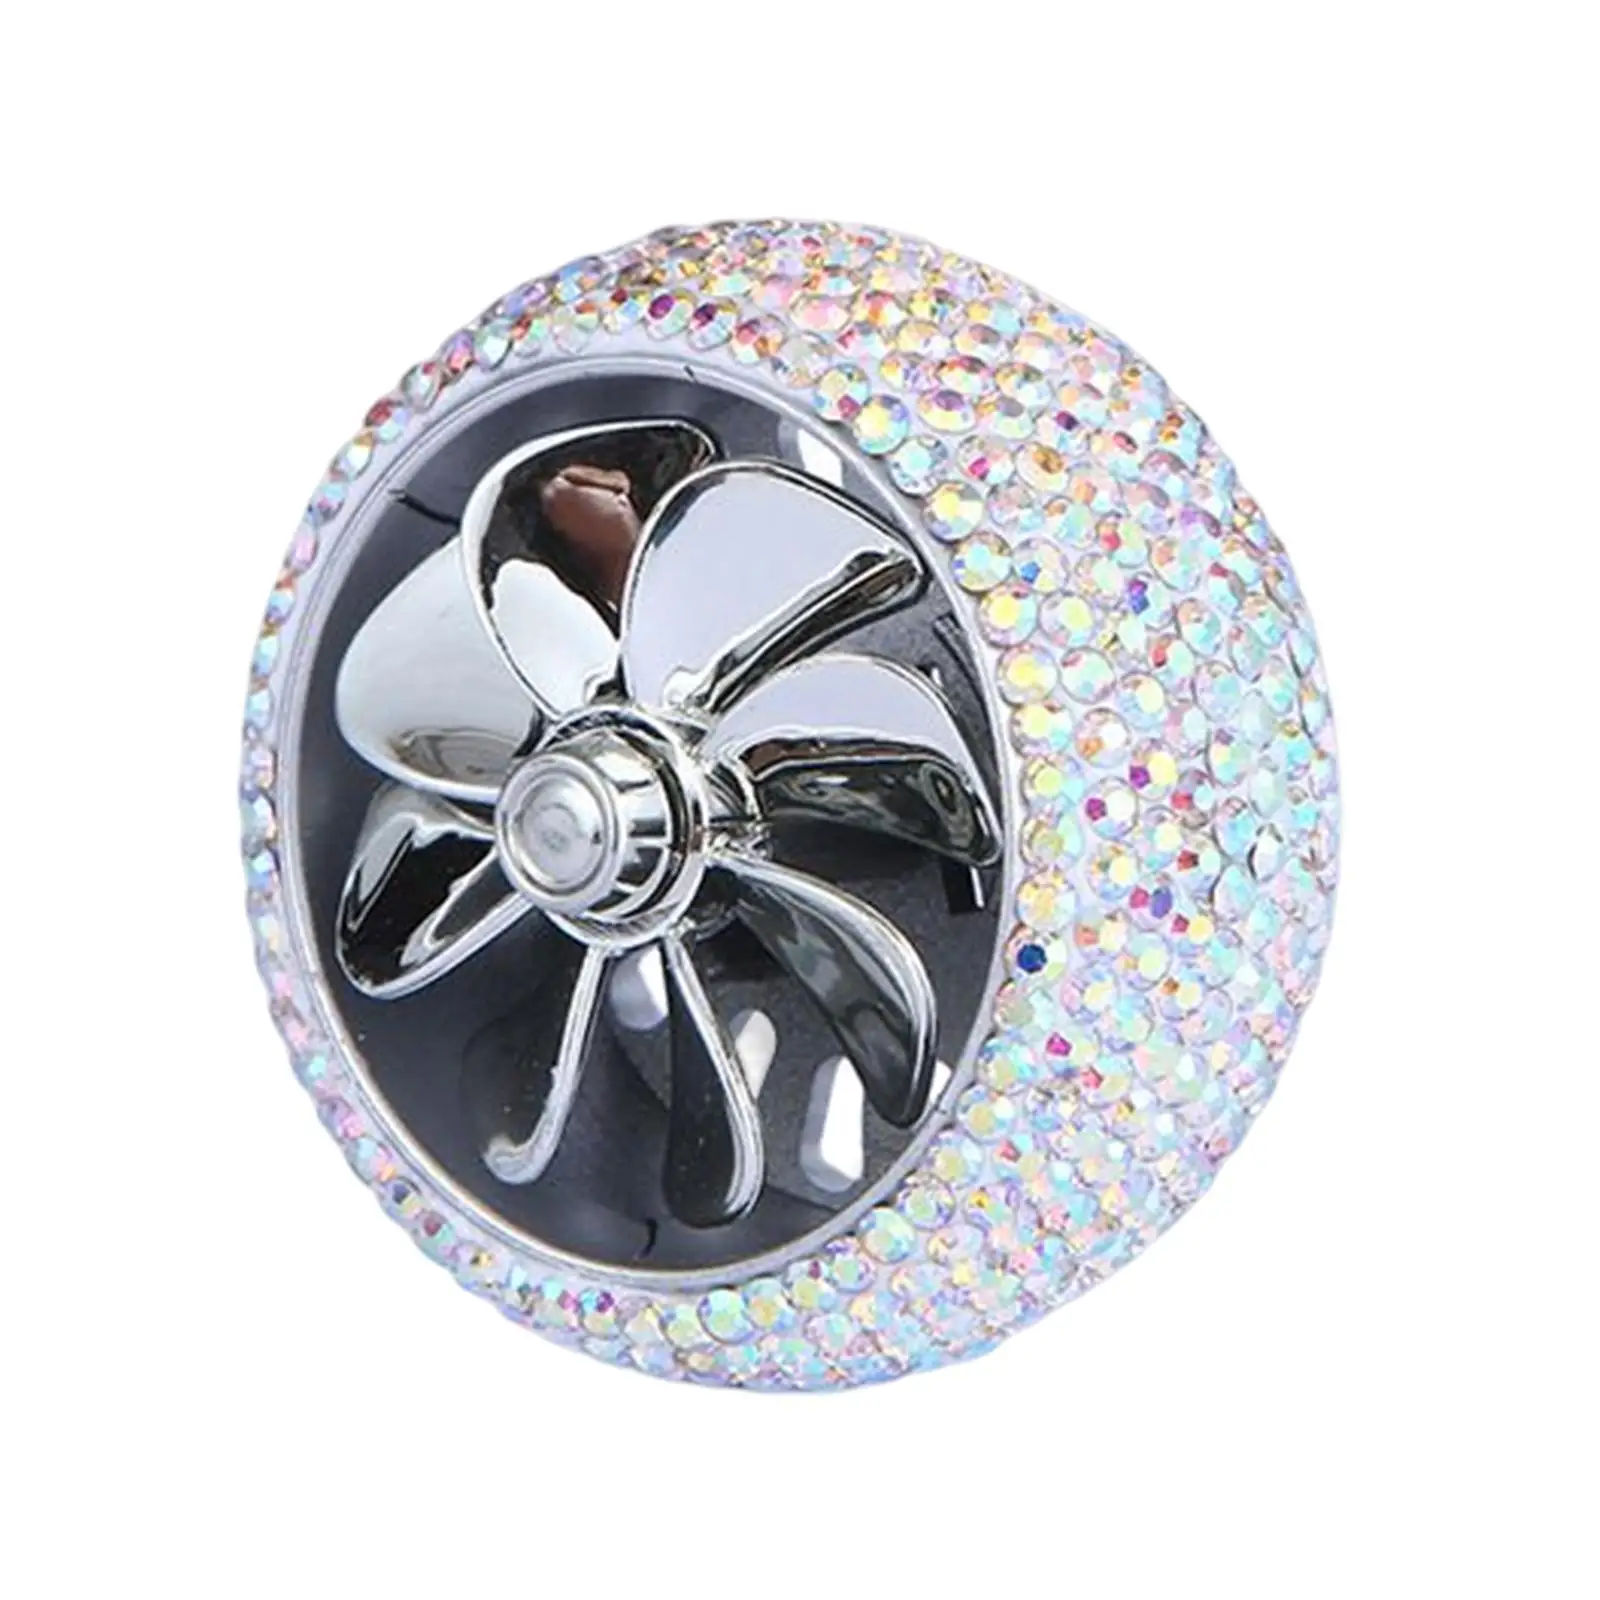 Air Vent Fan Diffuser Decor Fragrance Accessories Automotive Delicate Supplies Air Conditioning Car Air Outlet Clip Aromatherapy